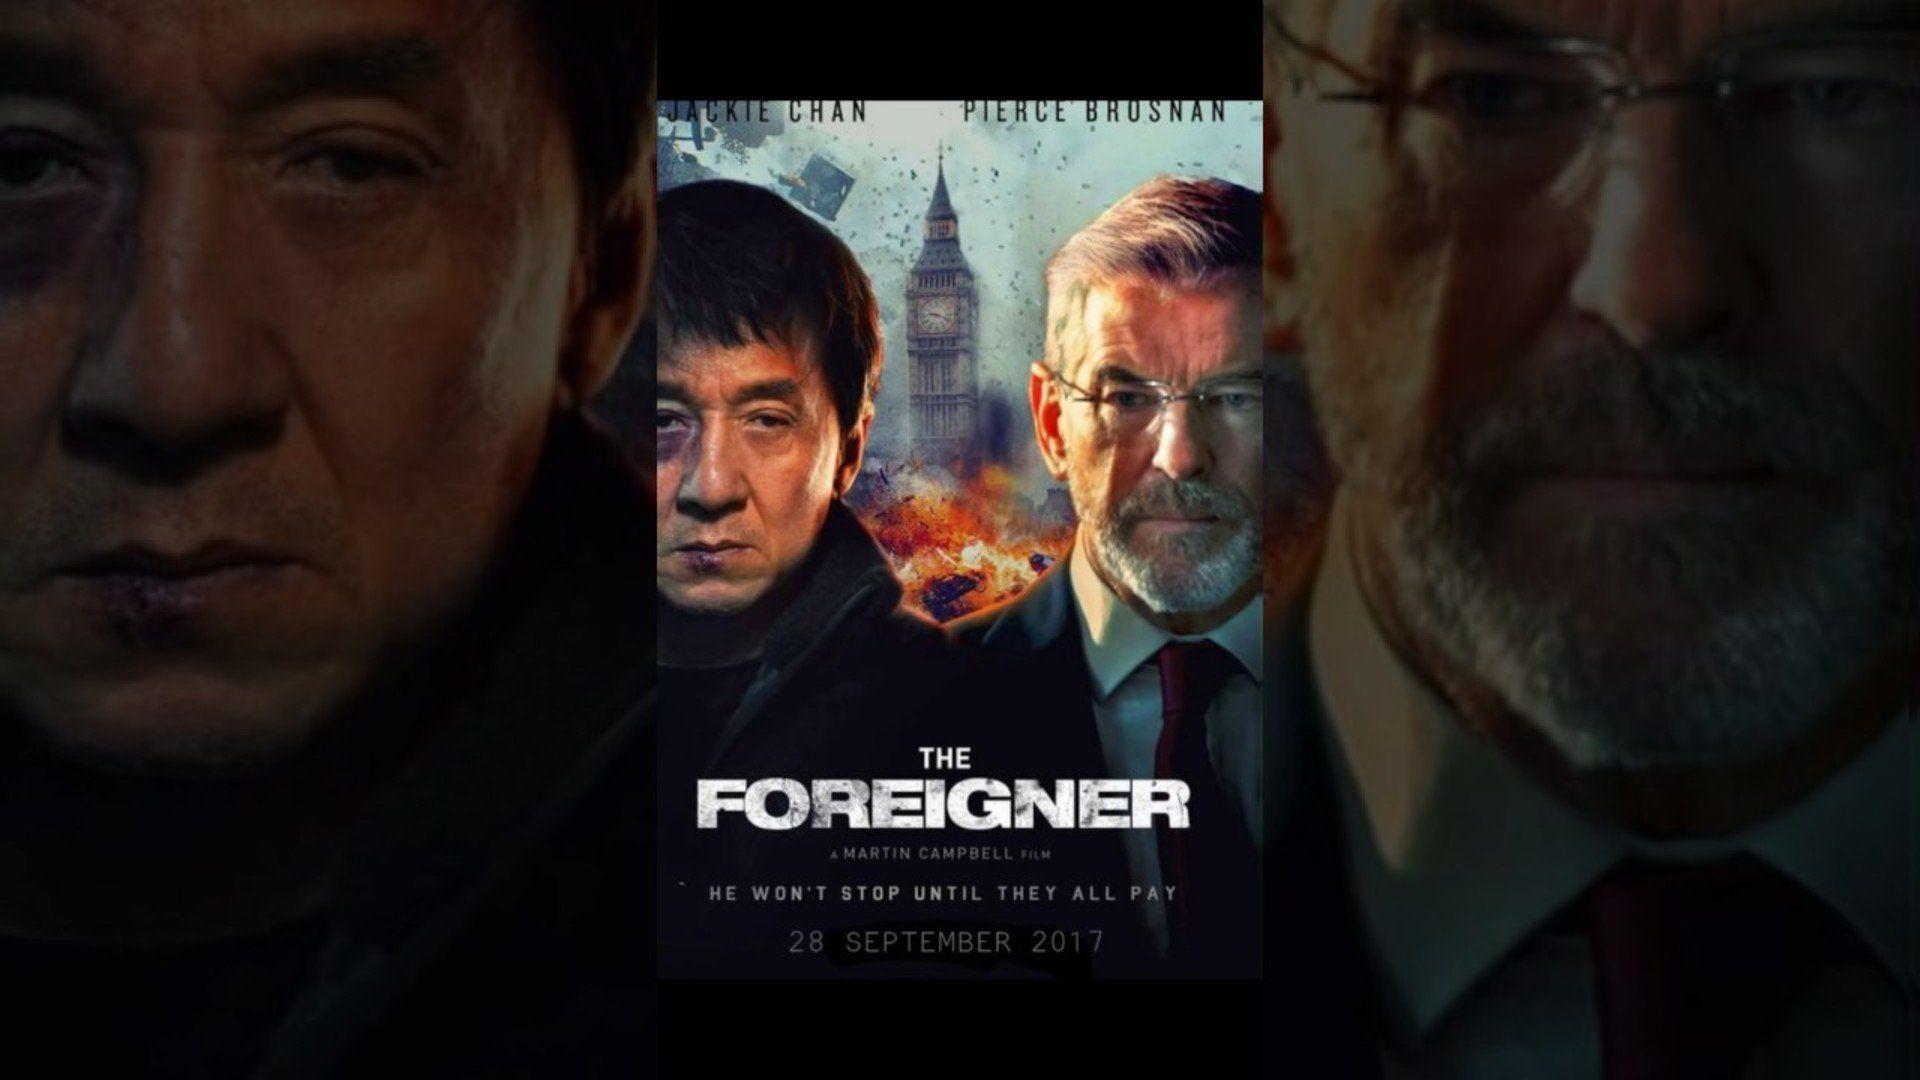 Play The Foreigner Full Movie The IRA took his family. The police